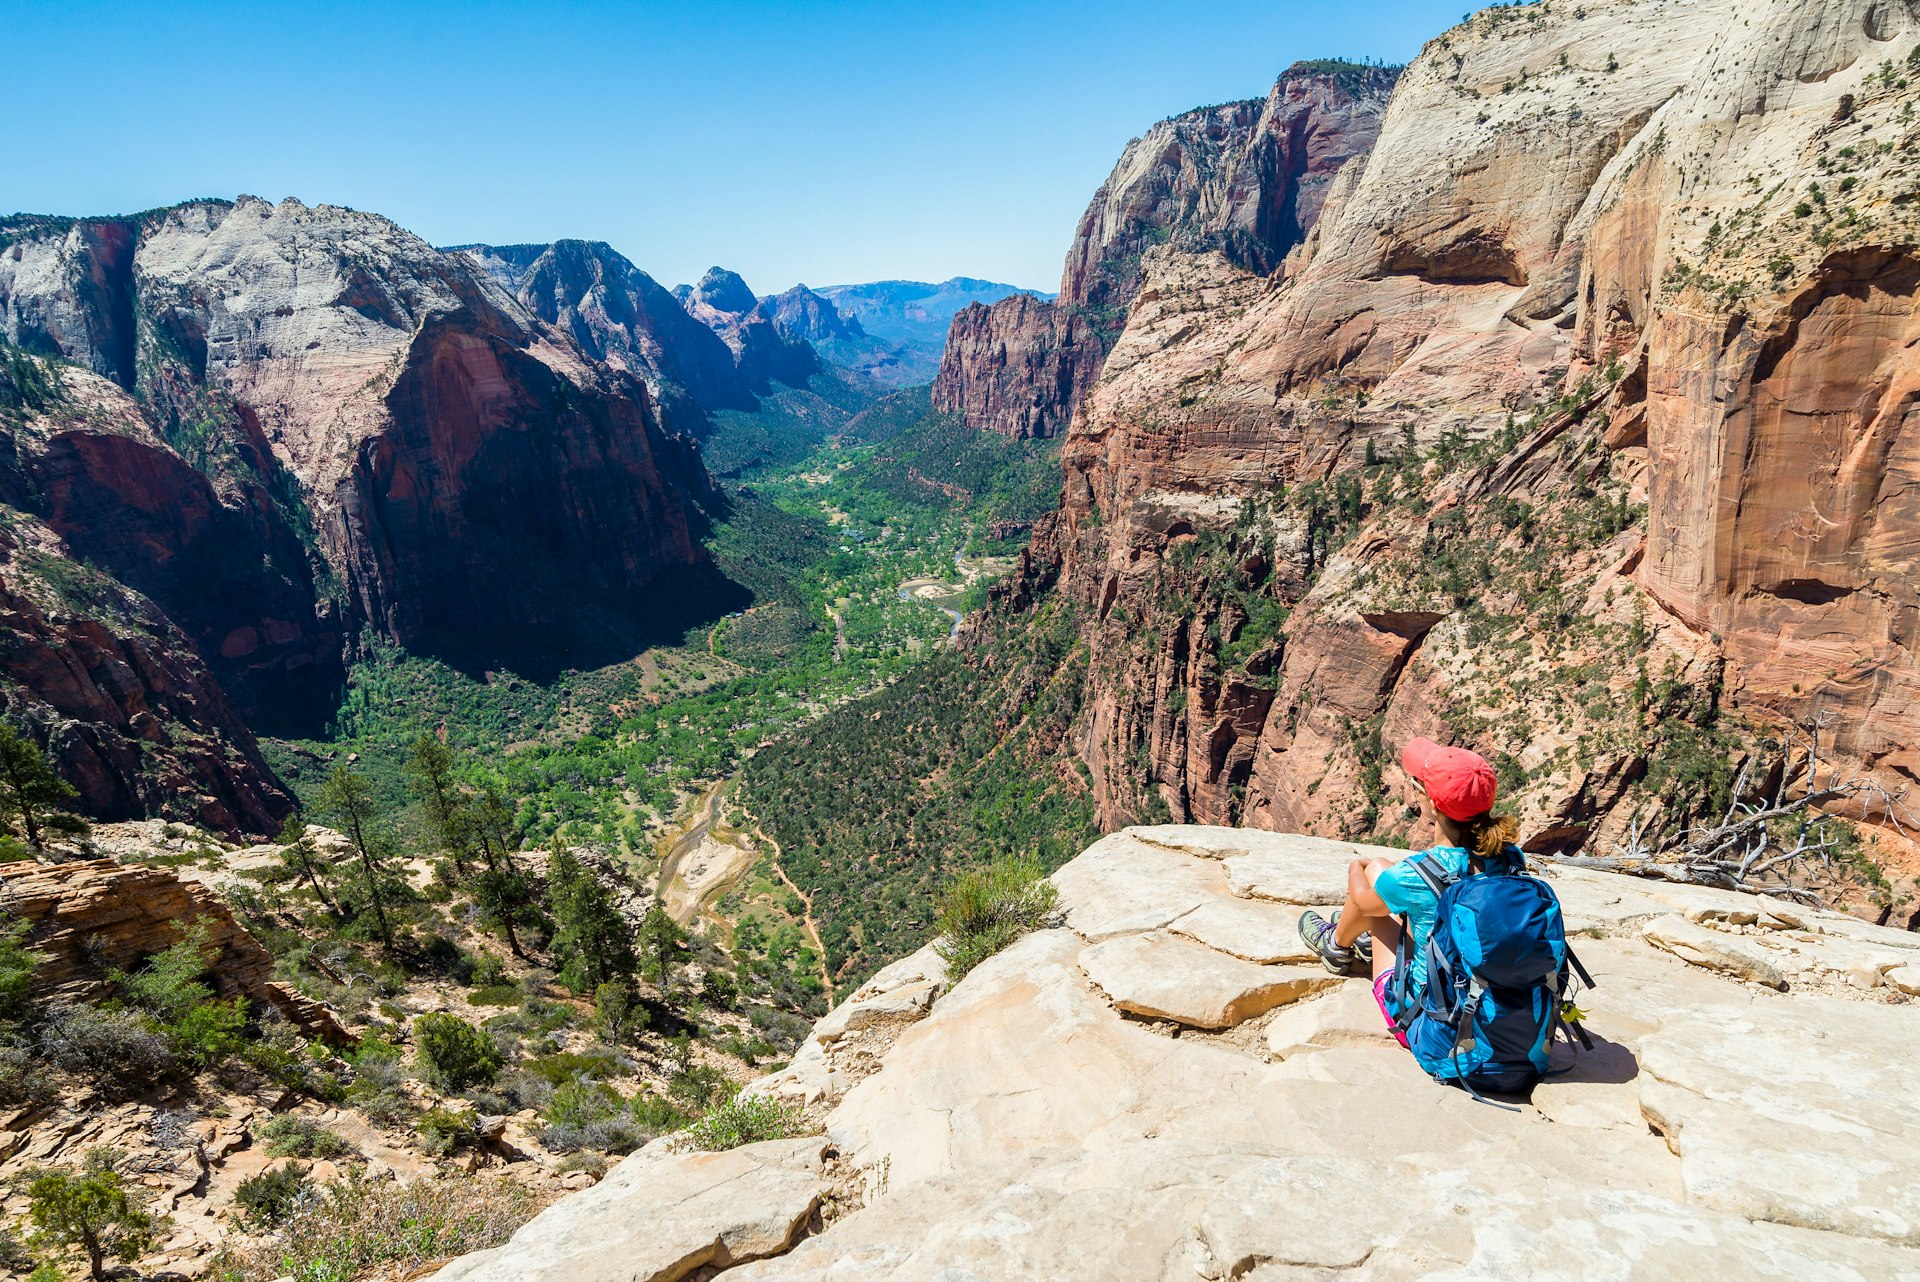 A female hiker sits, looking out over a deep canyon